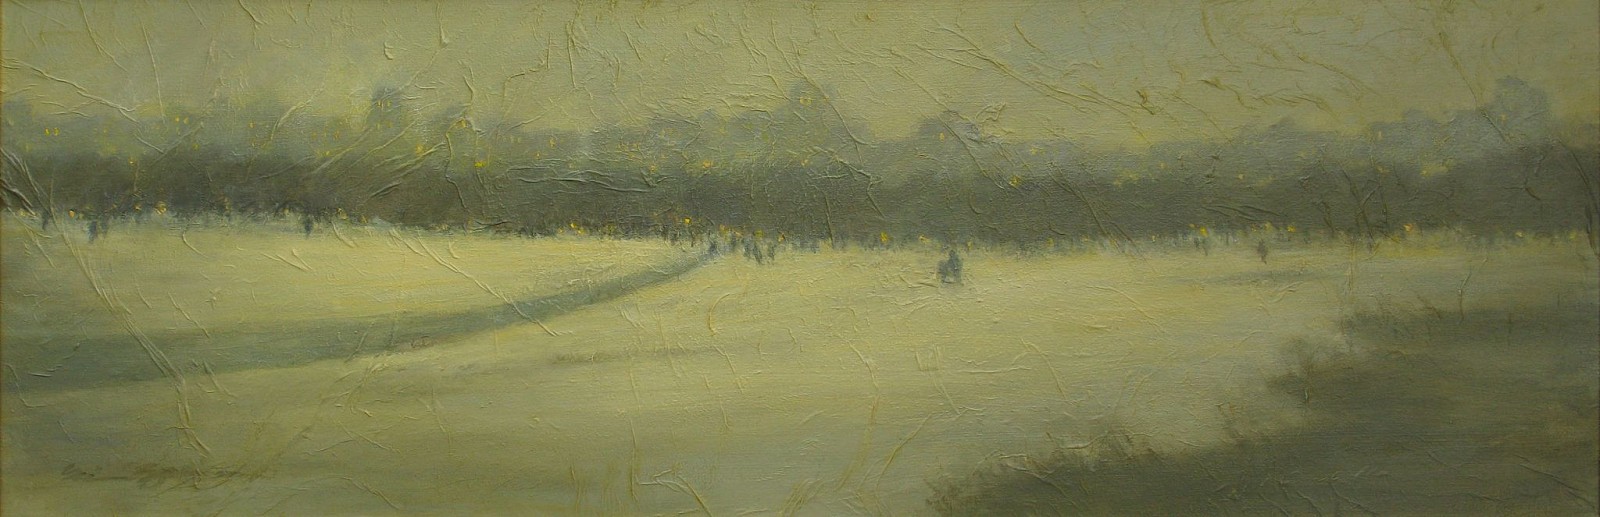 Nina Maguire, Central Park Winter, 2011, 2011
acrylic on board with seikishu rice paper, 12 x 36 in. (30.5 x 91.4 cm)
NM010311